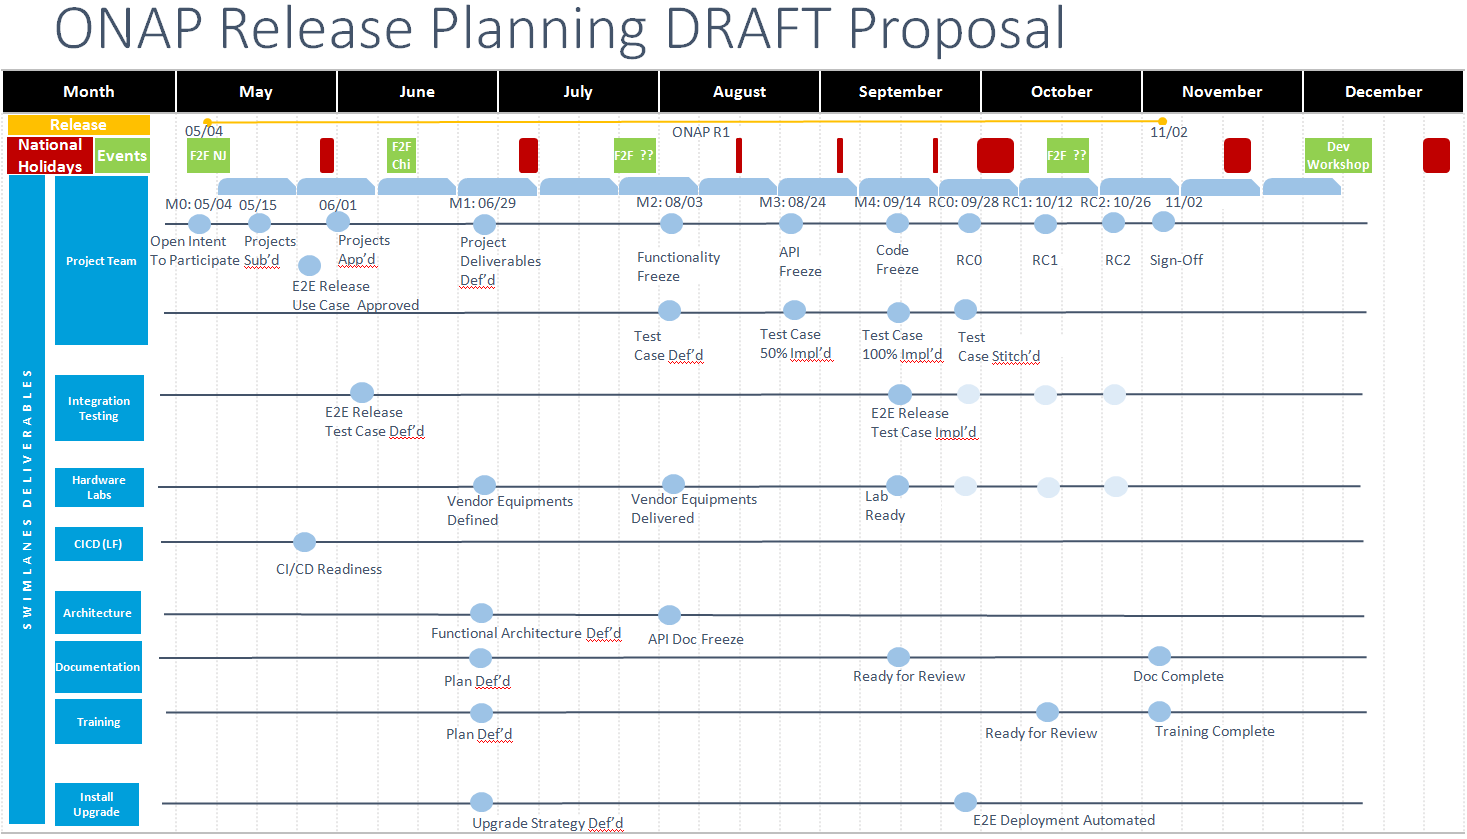 ONAP Release 1 Planning Proposal Draft